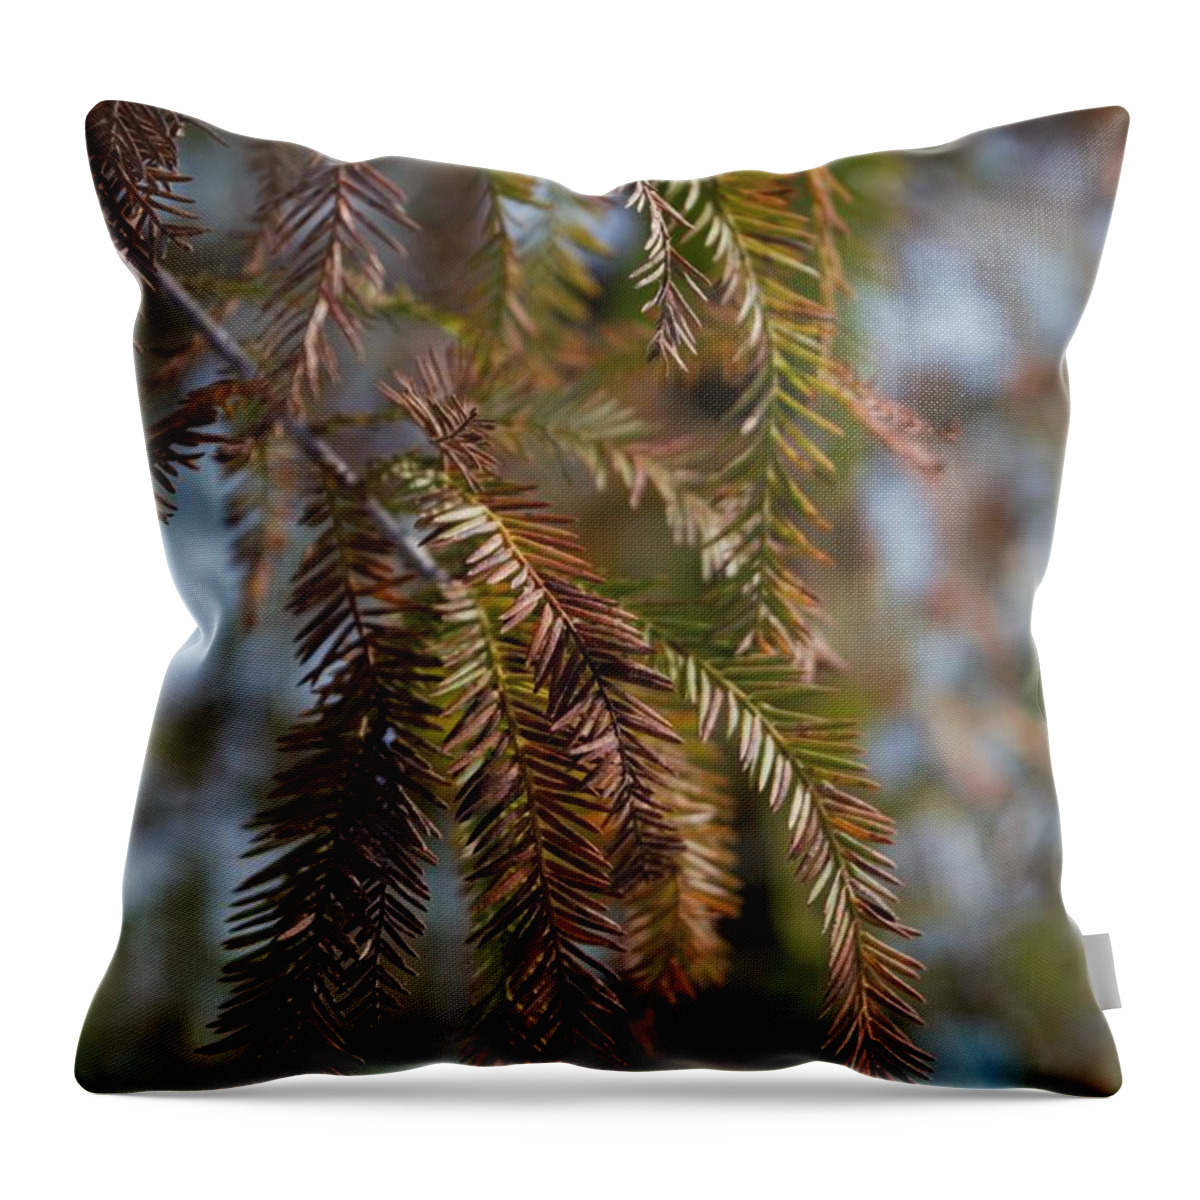 Tree Throw Pillow featuring the photograph Hanging Branch by Karen Harrison Brown